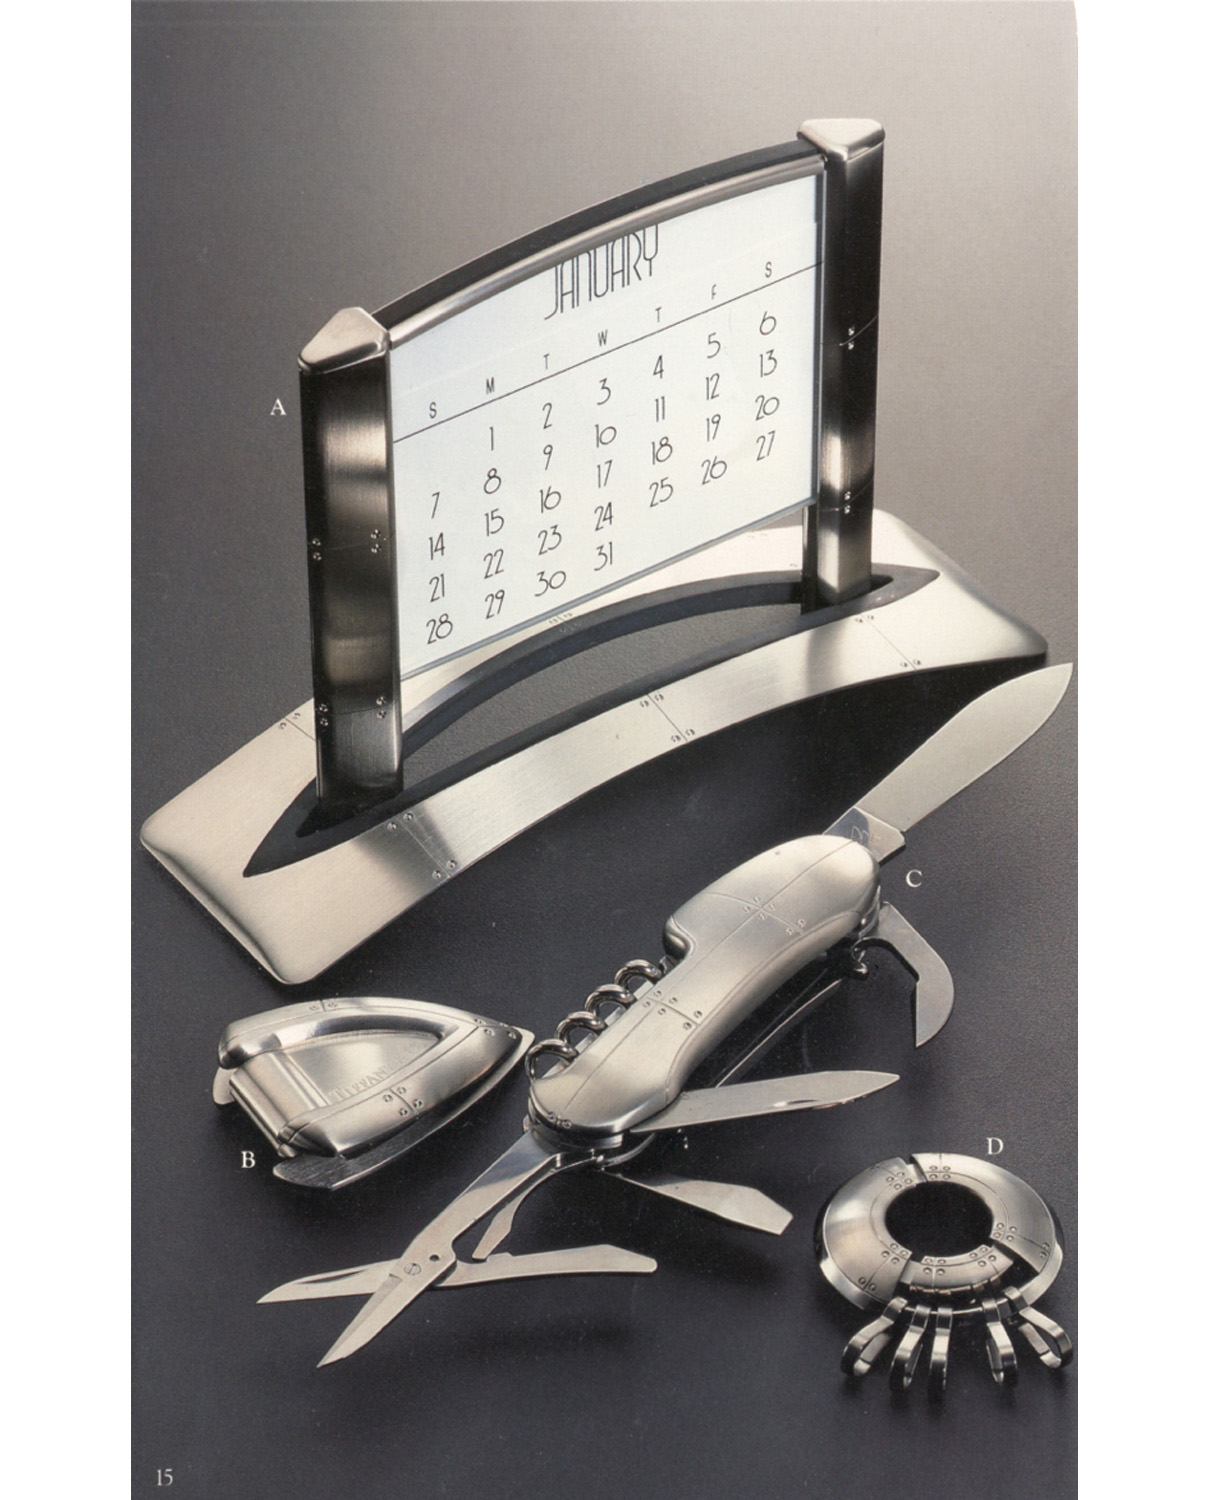 •	Tiffany & Co. Blue Book Catalog late 90's Streamerica Stainless Steel Collection: Airframe Perpetual Calendar, Laminar Money Clip, Carapace Pocket Knife, and Porthole Keyring.